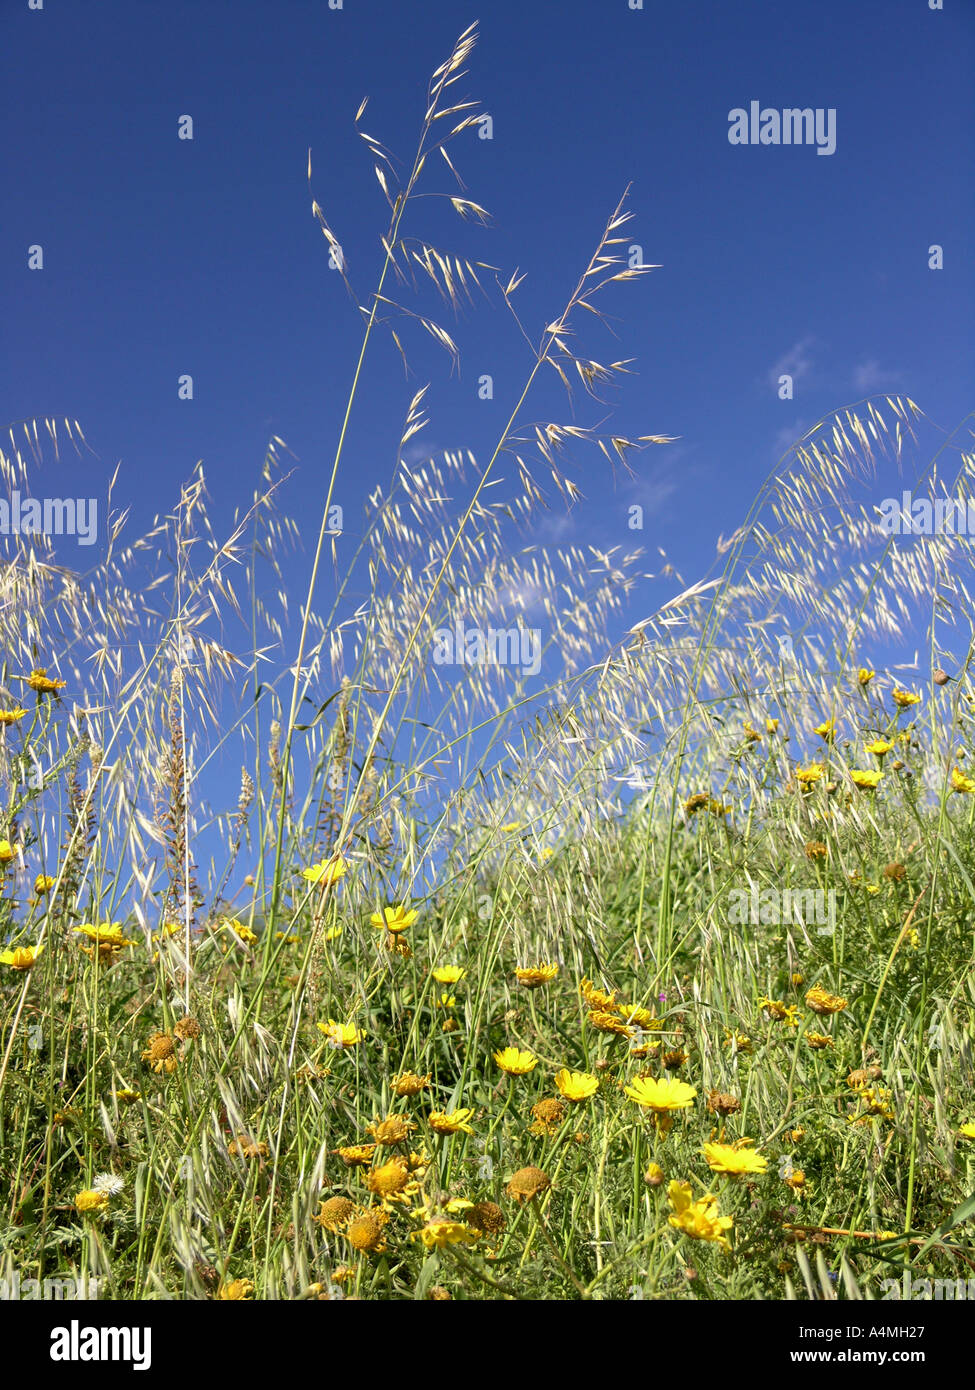 Crown daisy yellow Chrysanthemum coronarium in a field of tall grasses and a blue sky Stock Photo